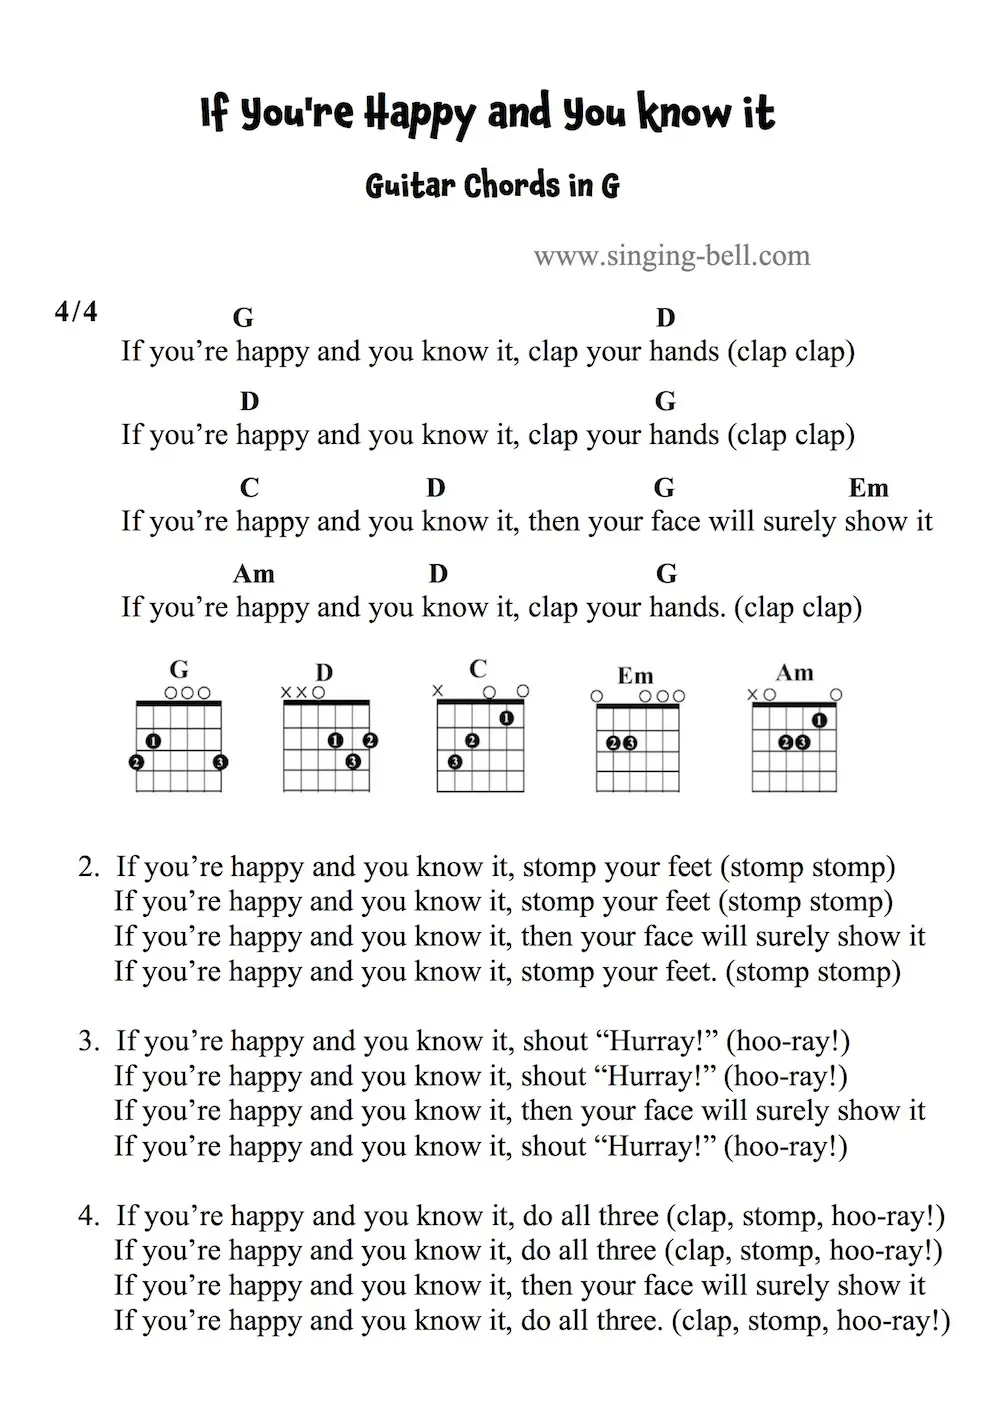 If You're Happy and You know it - Guitar Chords and Tabs in G.